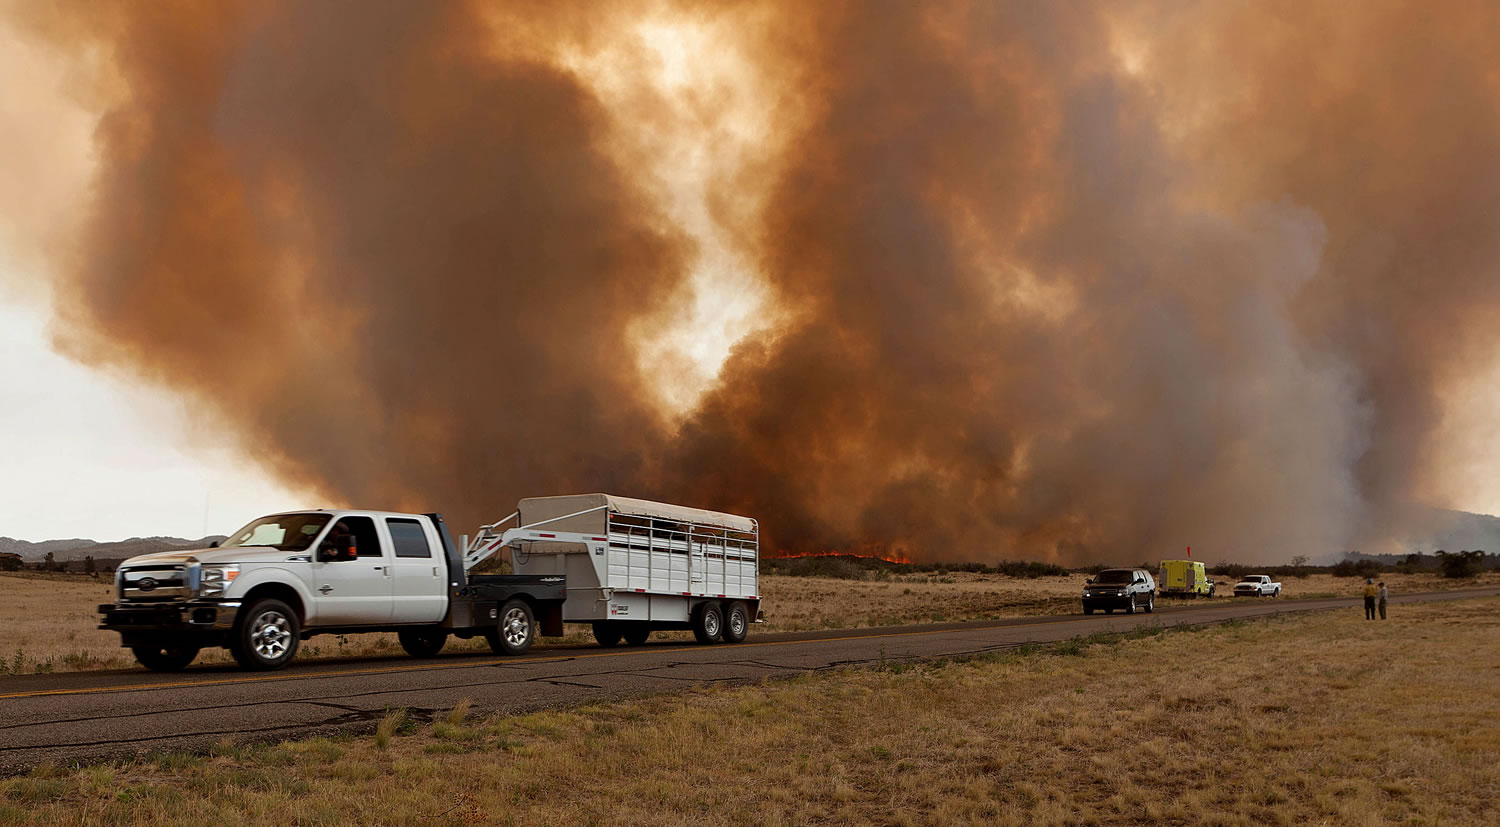 Residents evacuate along Hays Road in Peeples Valley, Ariz. as the Yarnell Hill fire advances  Sunday. The fire started Friday and picked up momentum under high temperatures, low humidity and wind.